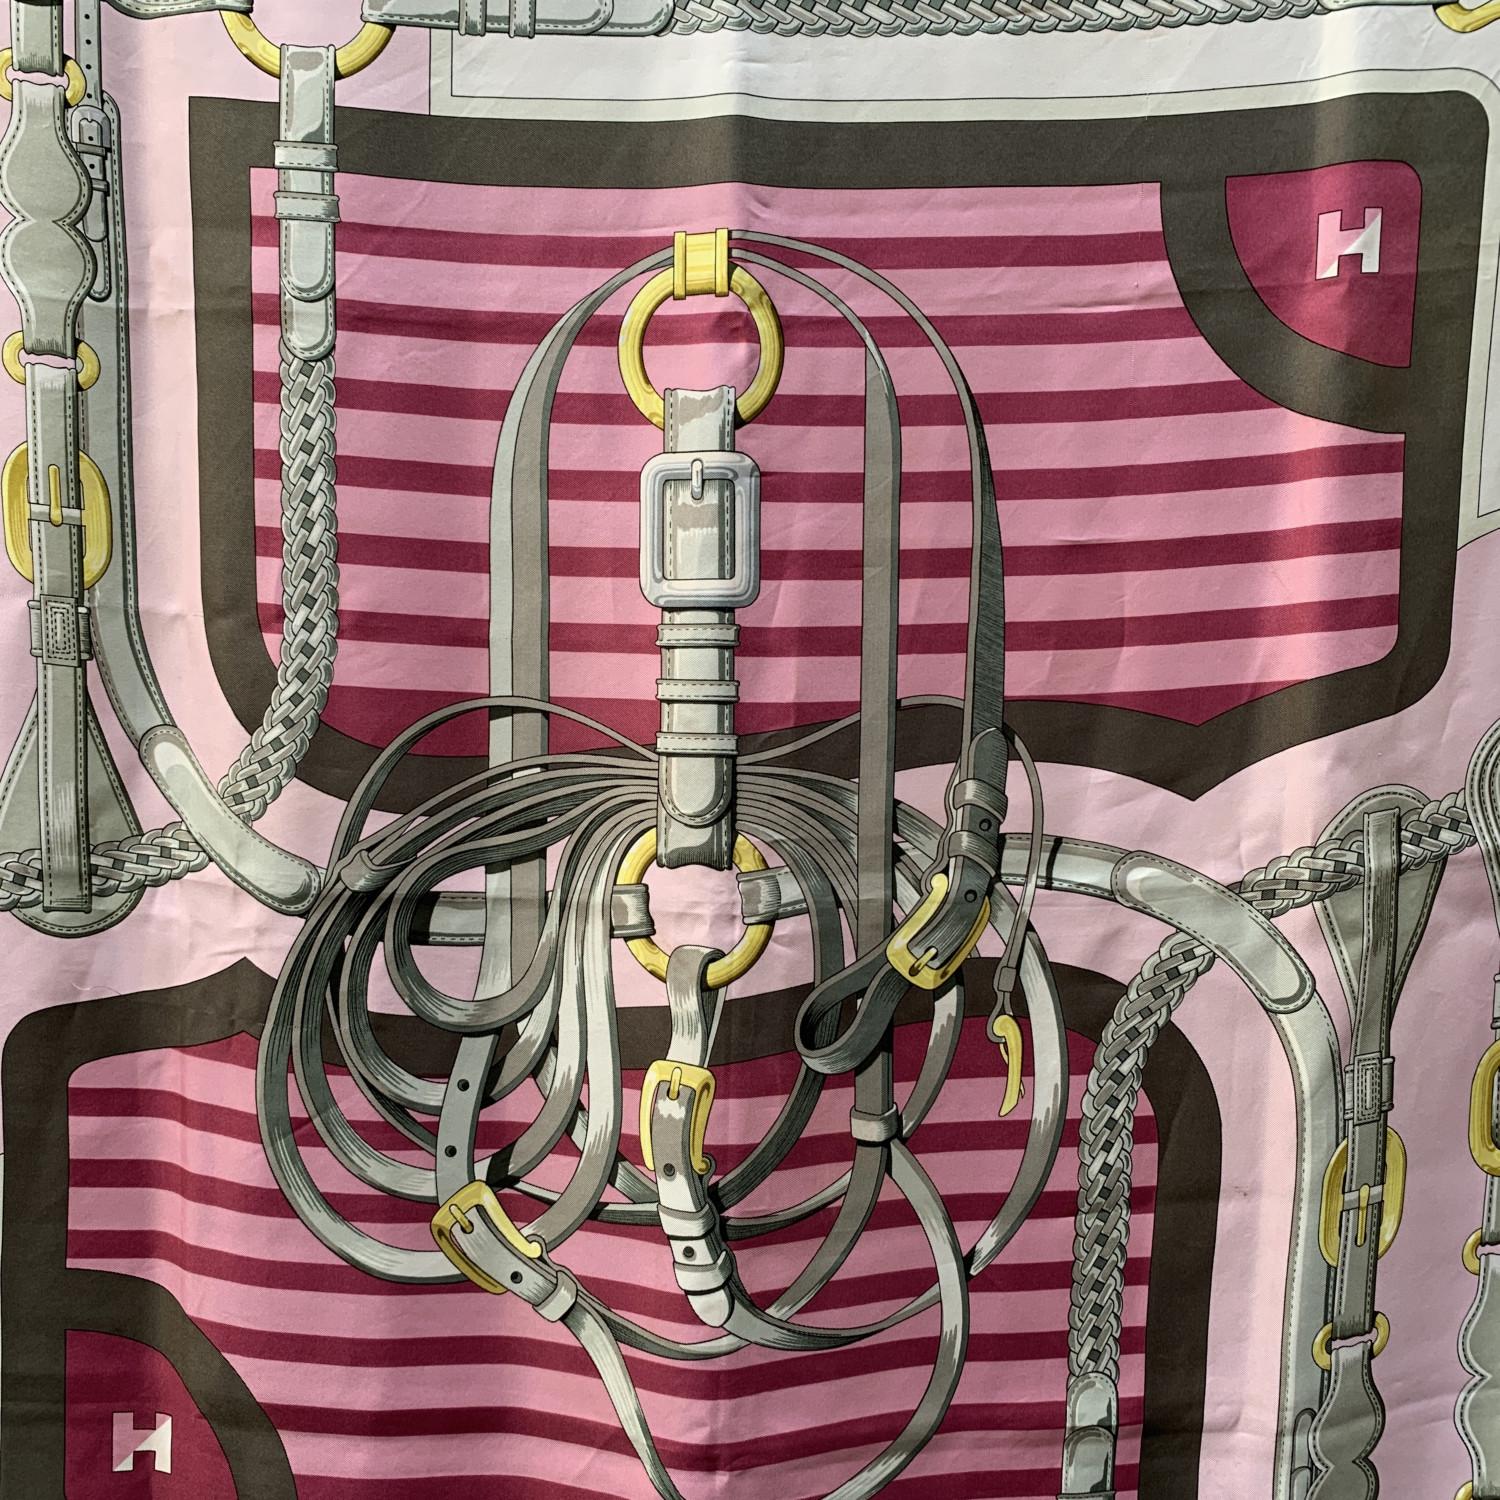 HERMES silk scarf named 'Coaching' , designed by Julie Abadie and issued the first time in 1976. Main colors are pink, purple, grey and yellow. It depicts different elements participating in the horse's harness. Hand rolled edges. Measurements: